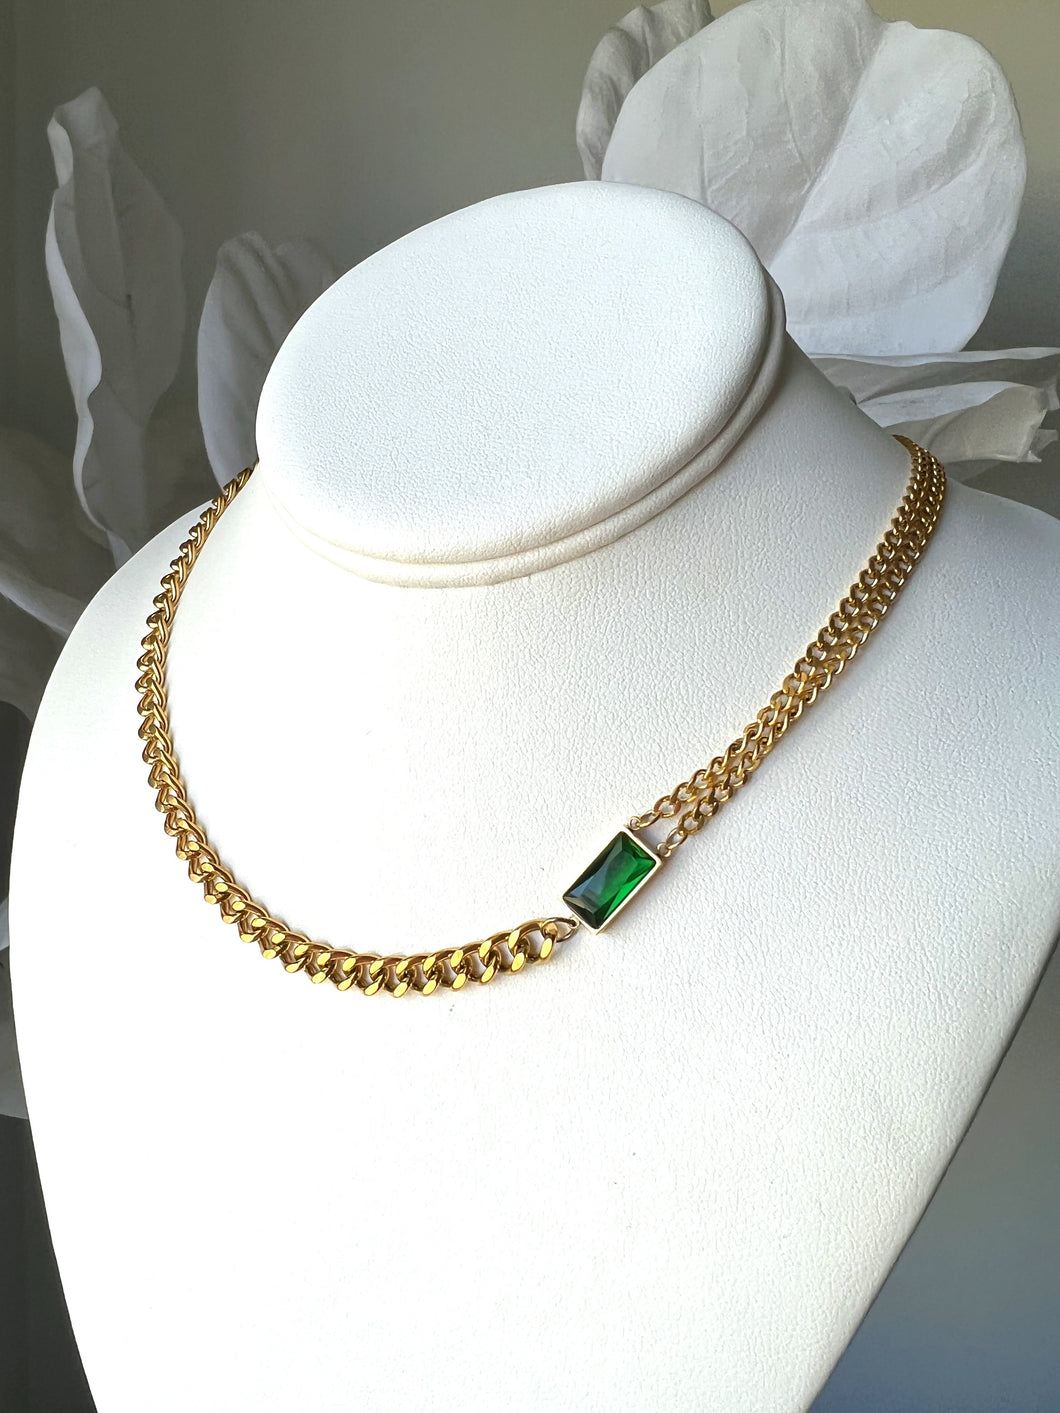 Astor Necklace WIth Green Cubic Zircon